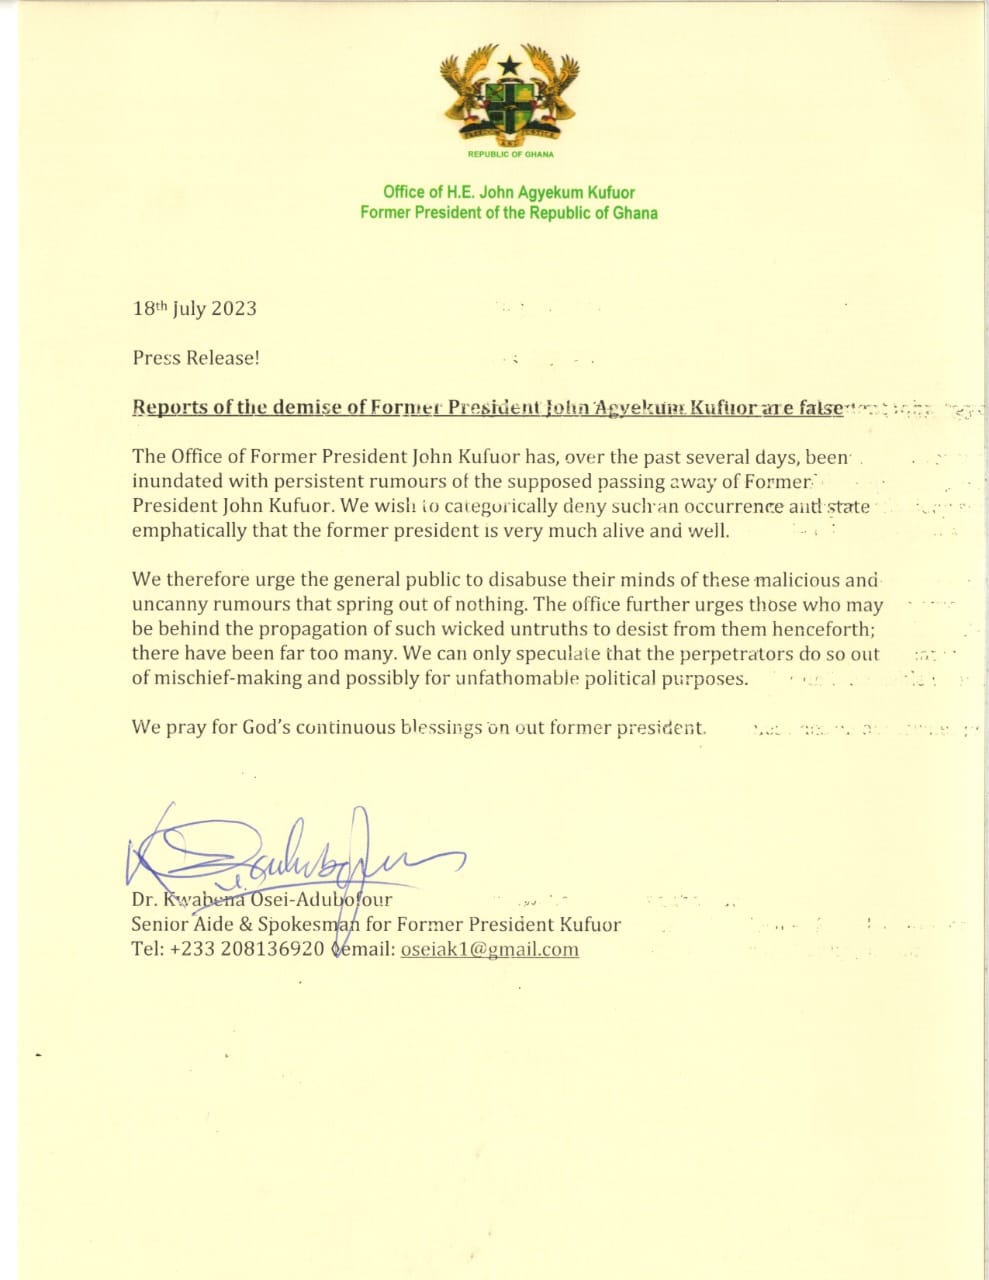 Statement from Kufuor's office debunking rumours that he has died